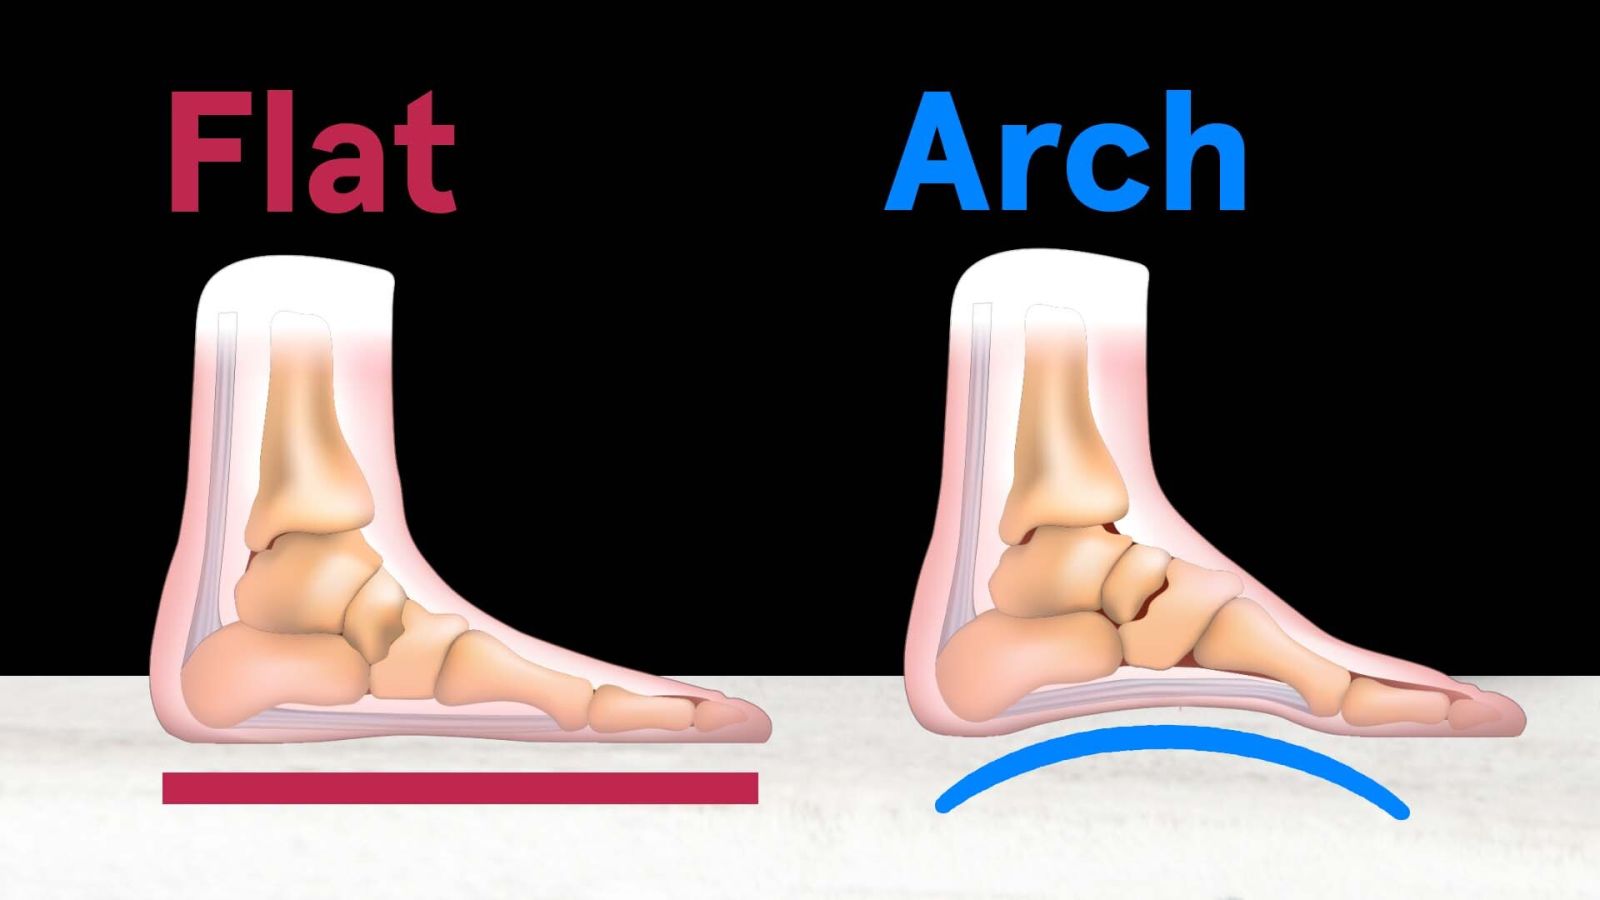 Every 'Useless' Body Part Explained From Head to Toe